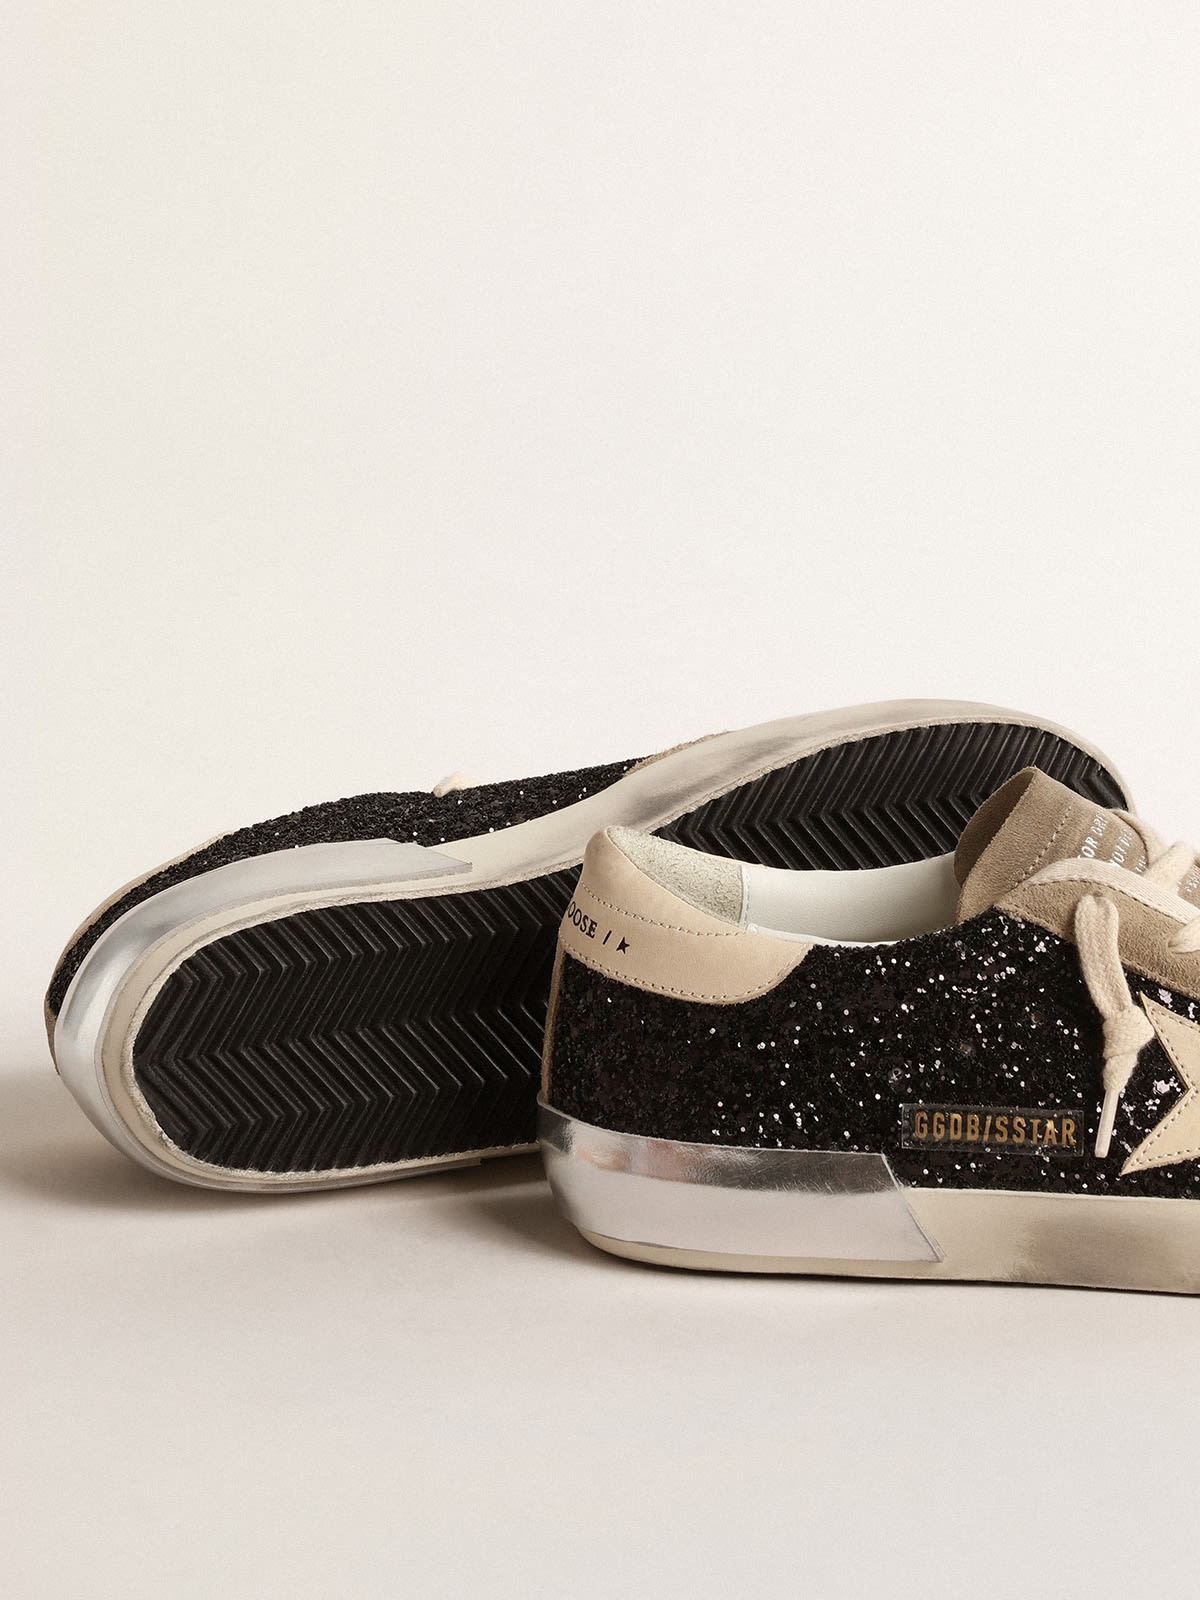 Golden Goose Super-Star in black glitter with cream star and suede inserts  | REVERSIBLE